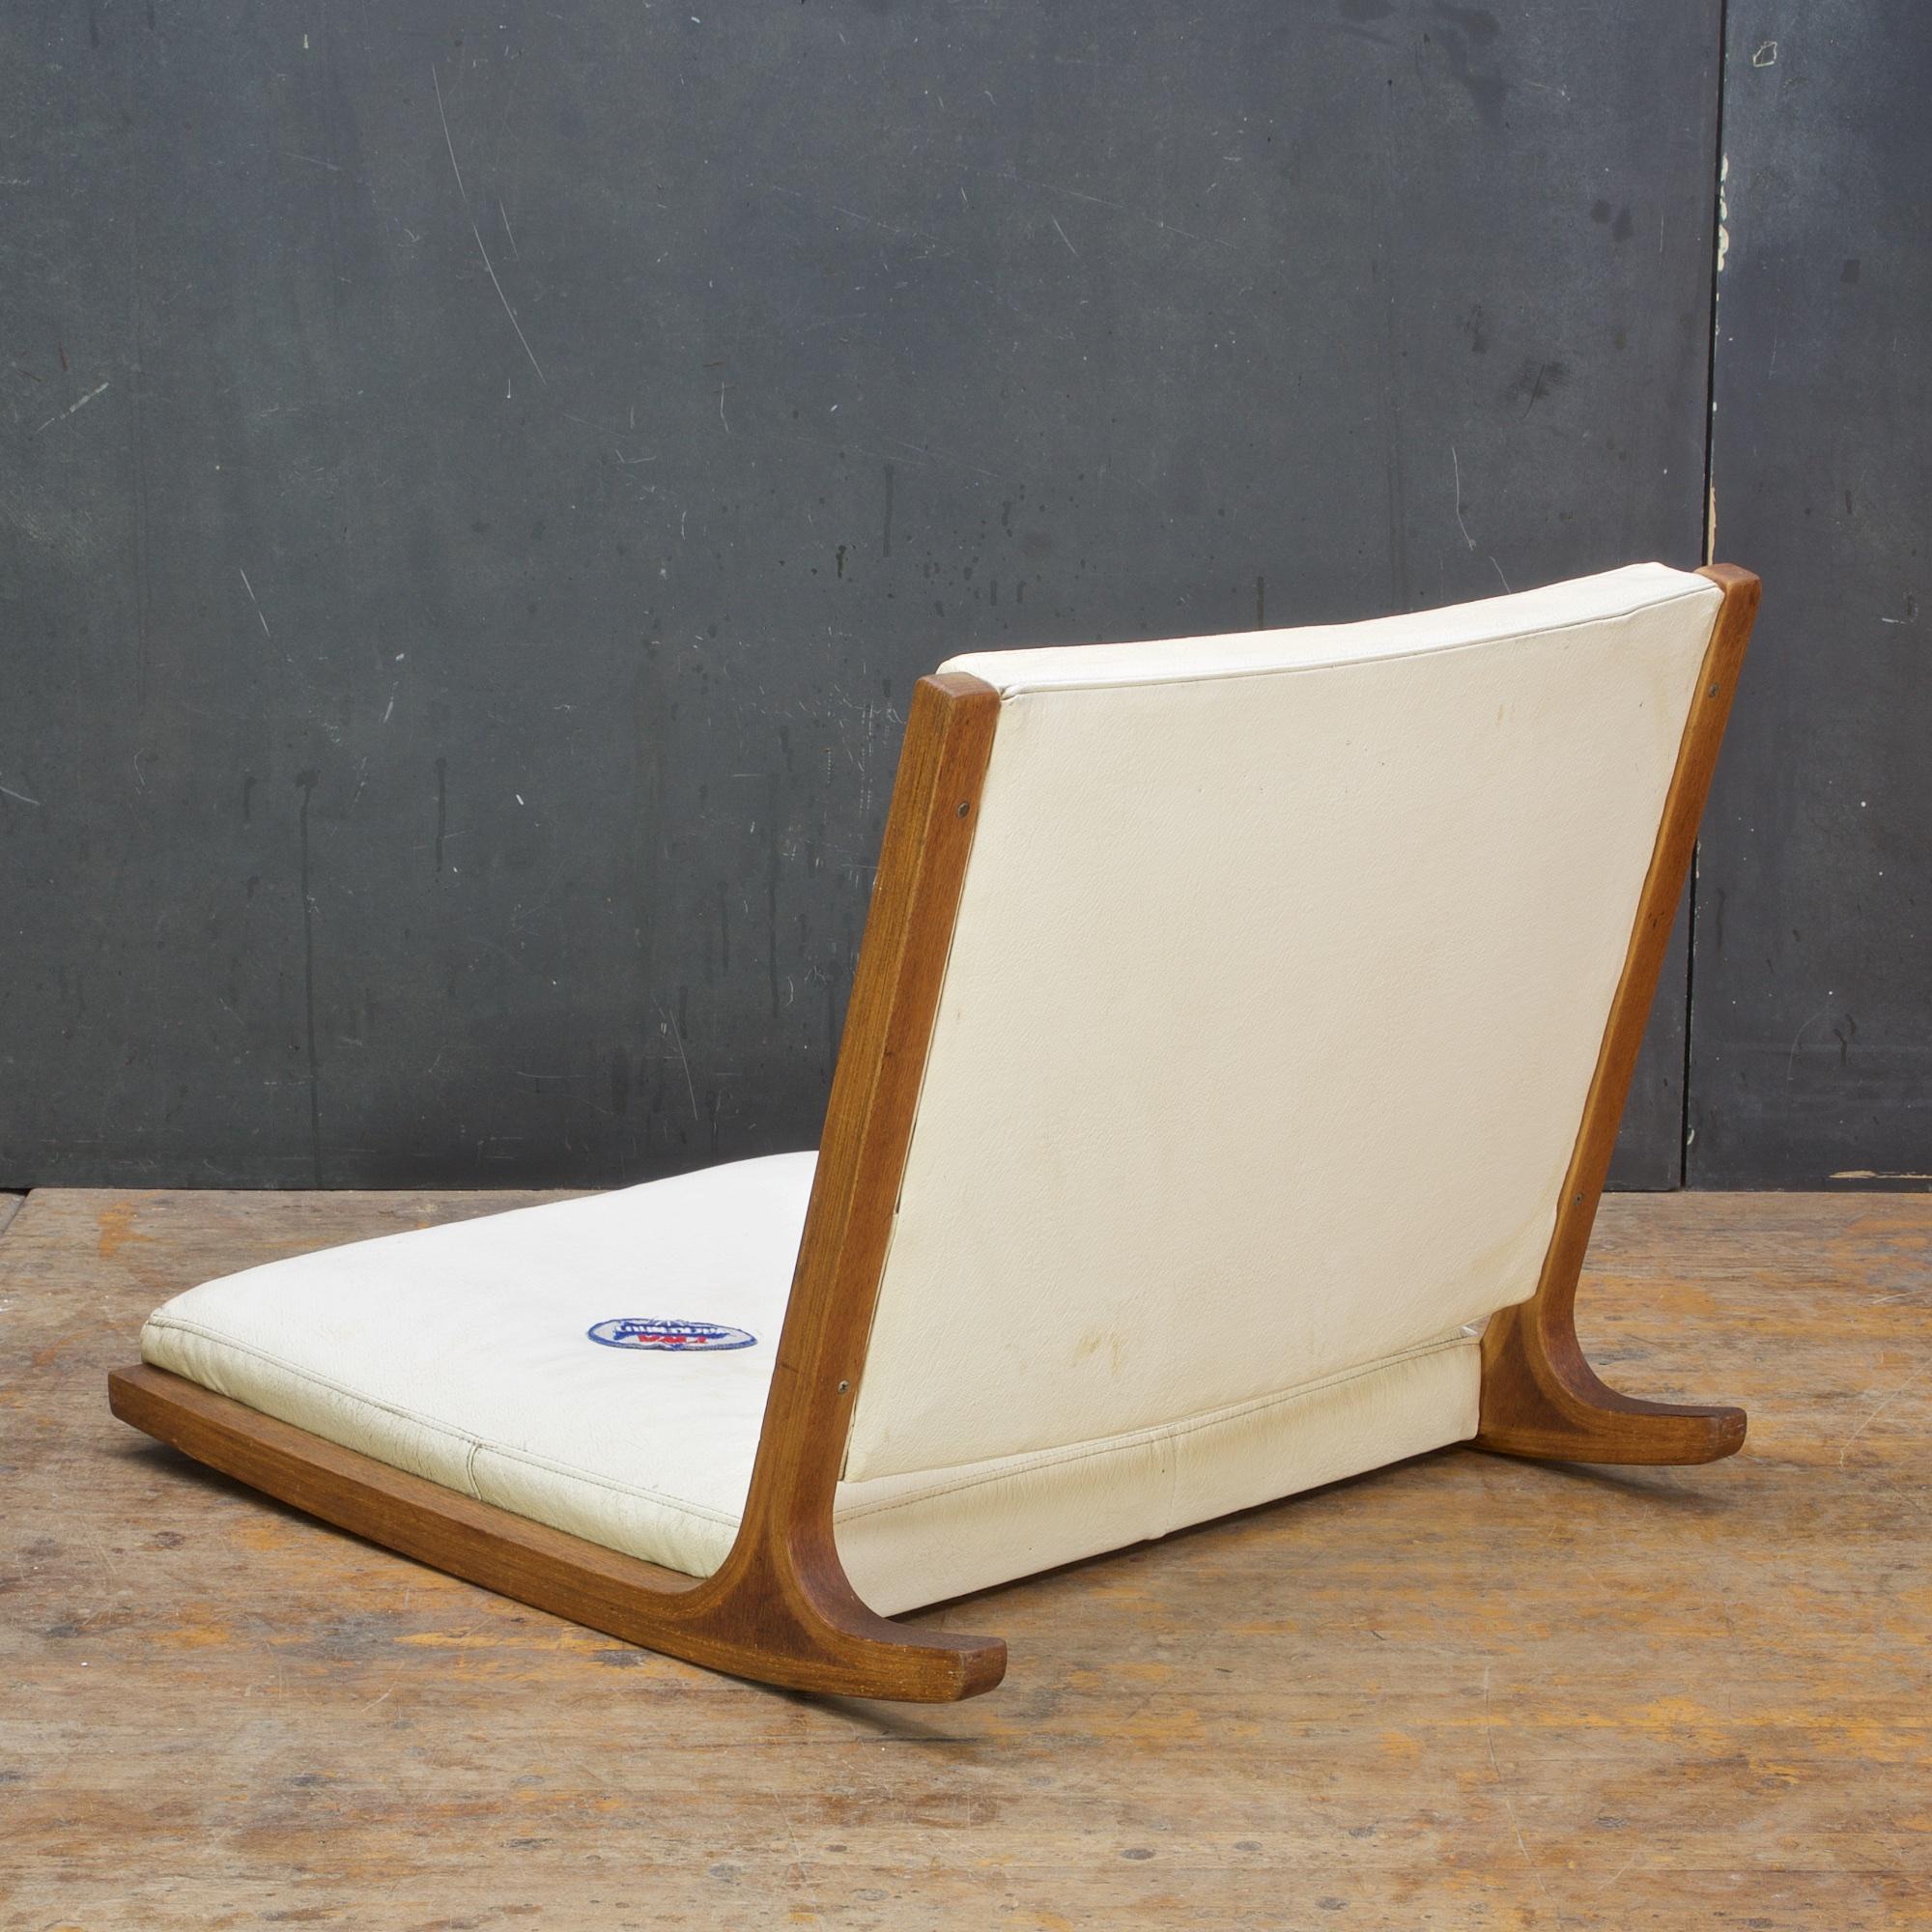 JAPAN, c.1960s. 
Kenzo Tarumi for Tendo Mokko. A rare baseless wooden rocking chair, very much in the manner of Junzo Sakakura (Japanese, 1901–1969). Bent and laminated beech wood, and upholstery is a textured white vinyl. Very similar construction